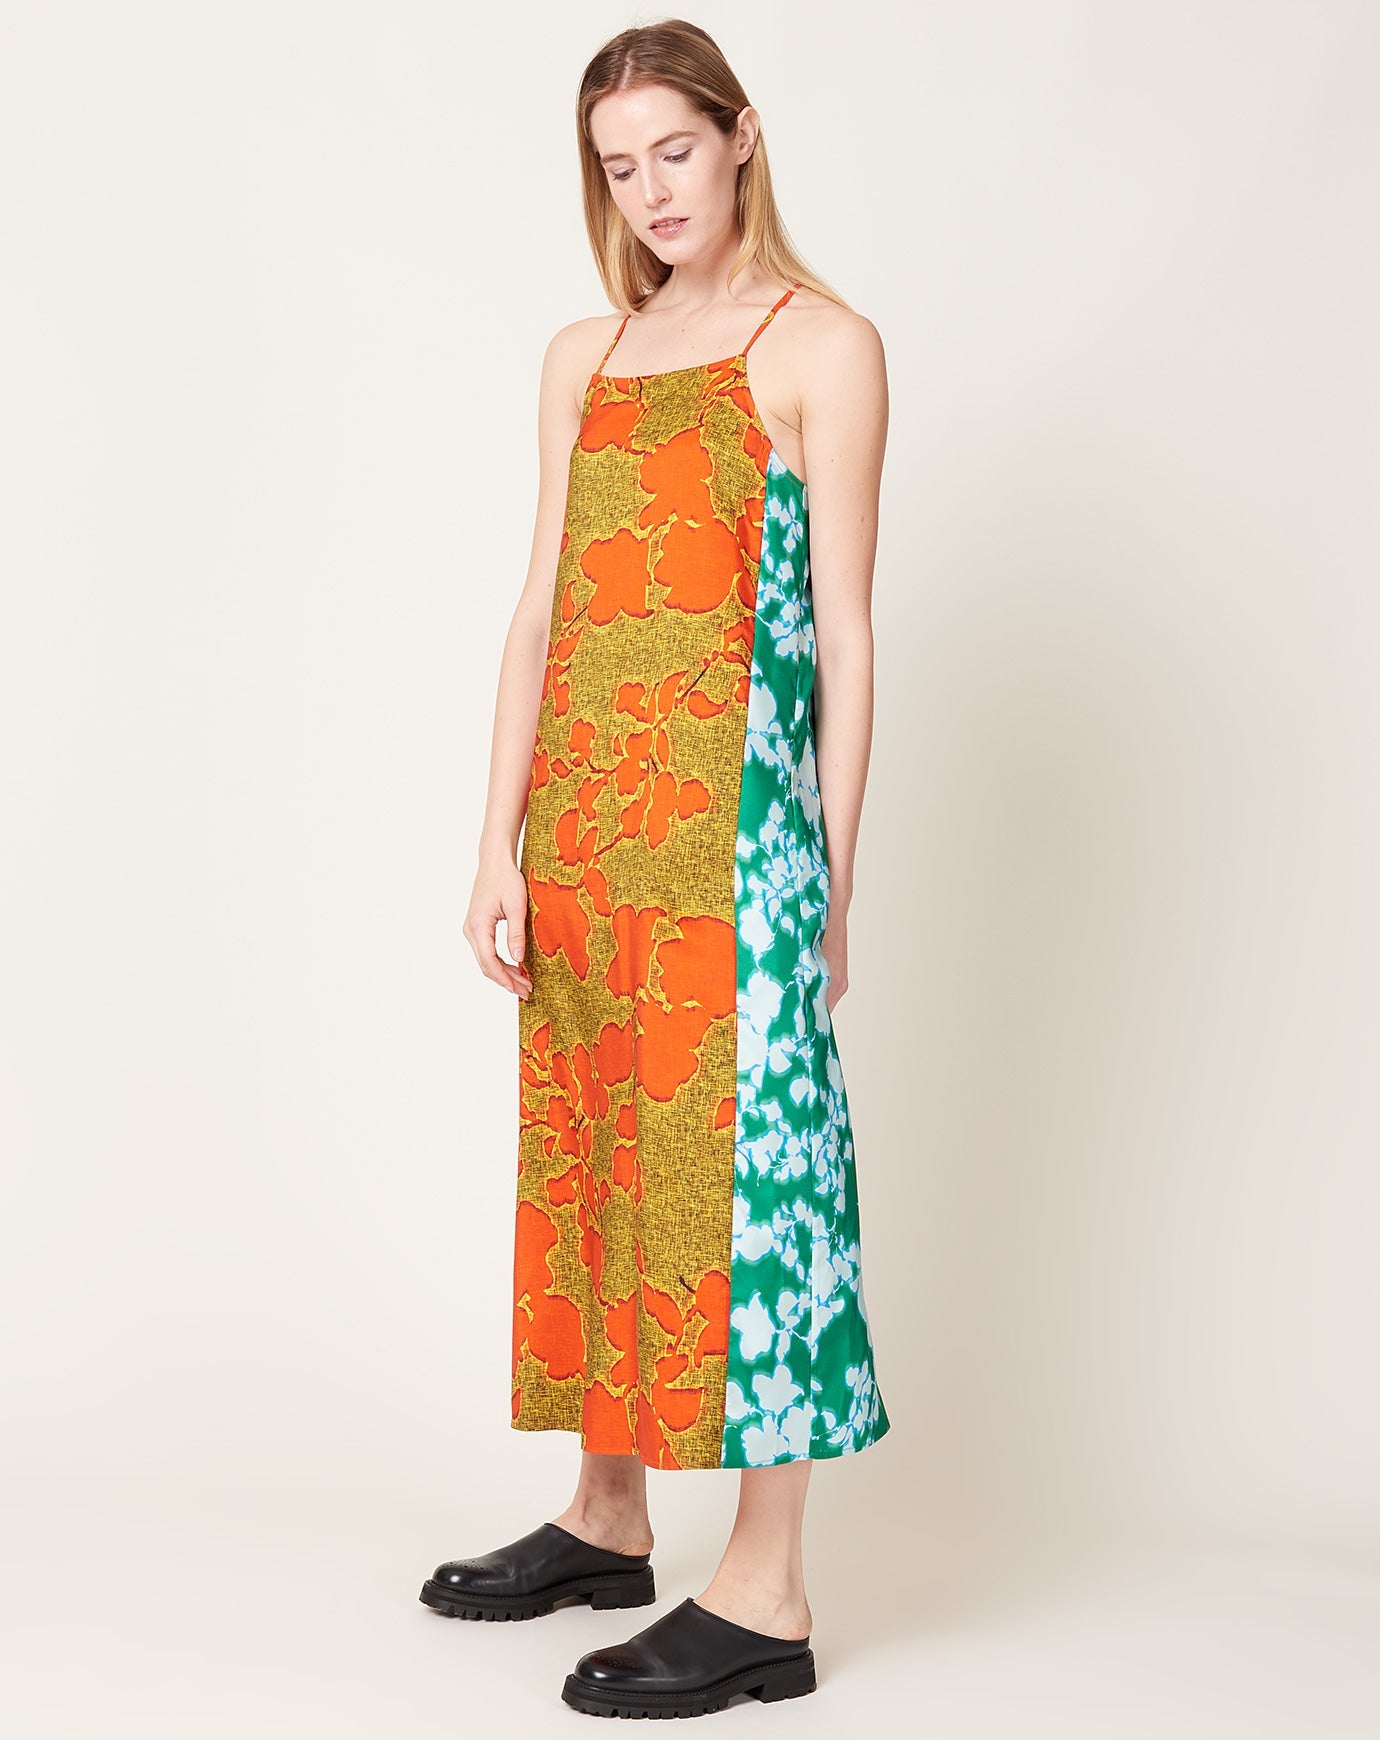 6397 Contrast Floral Slip Dress in Fire & Ice Floral